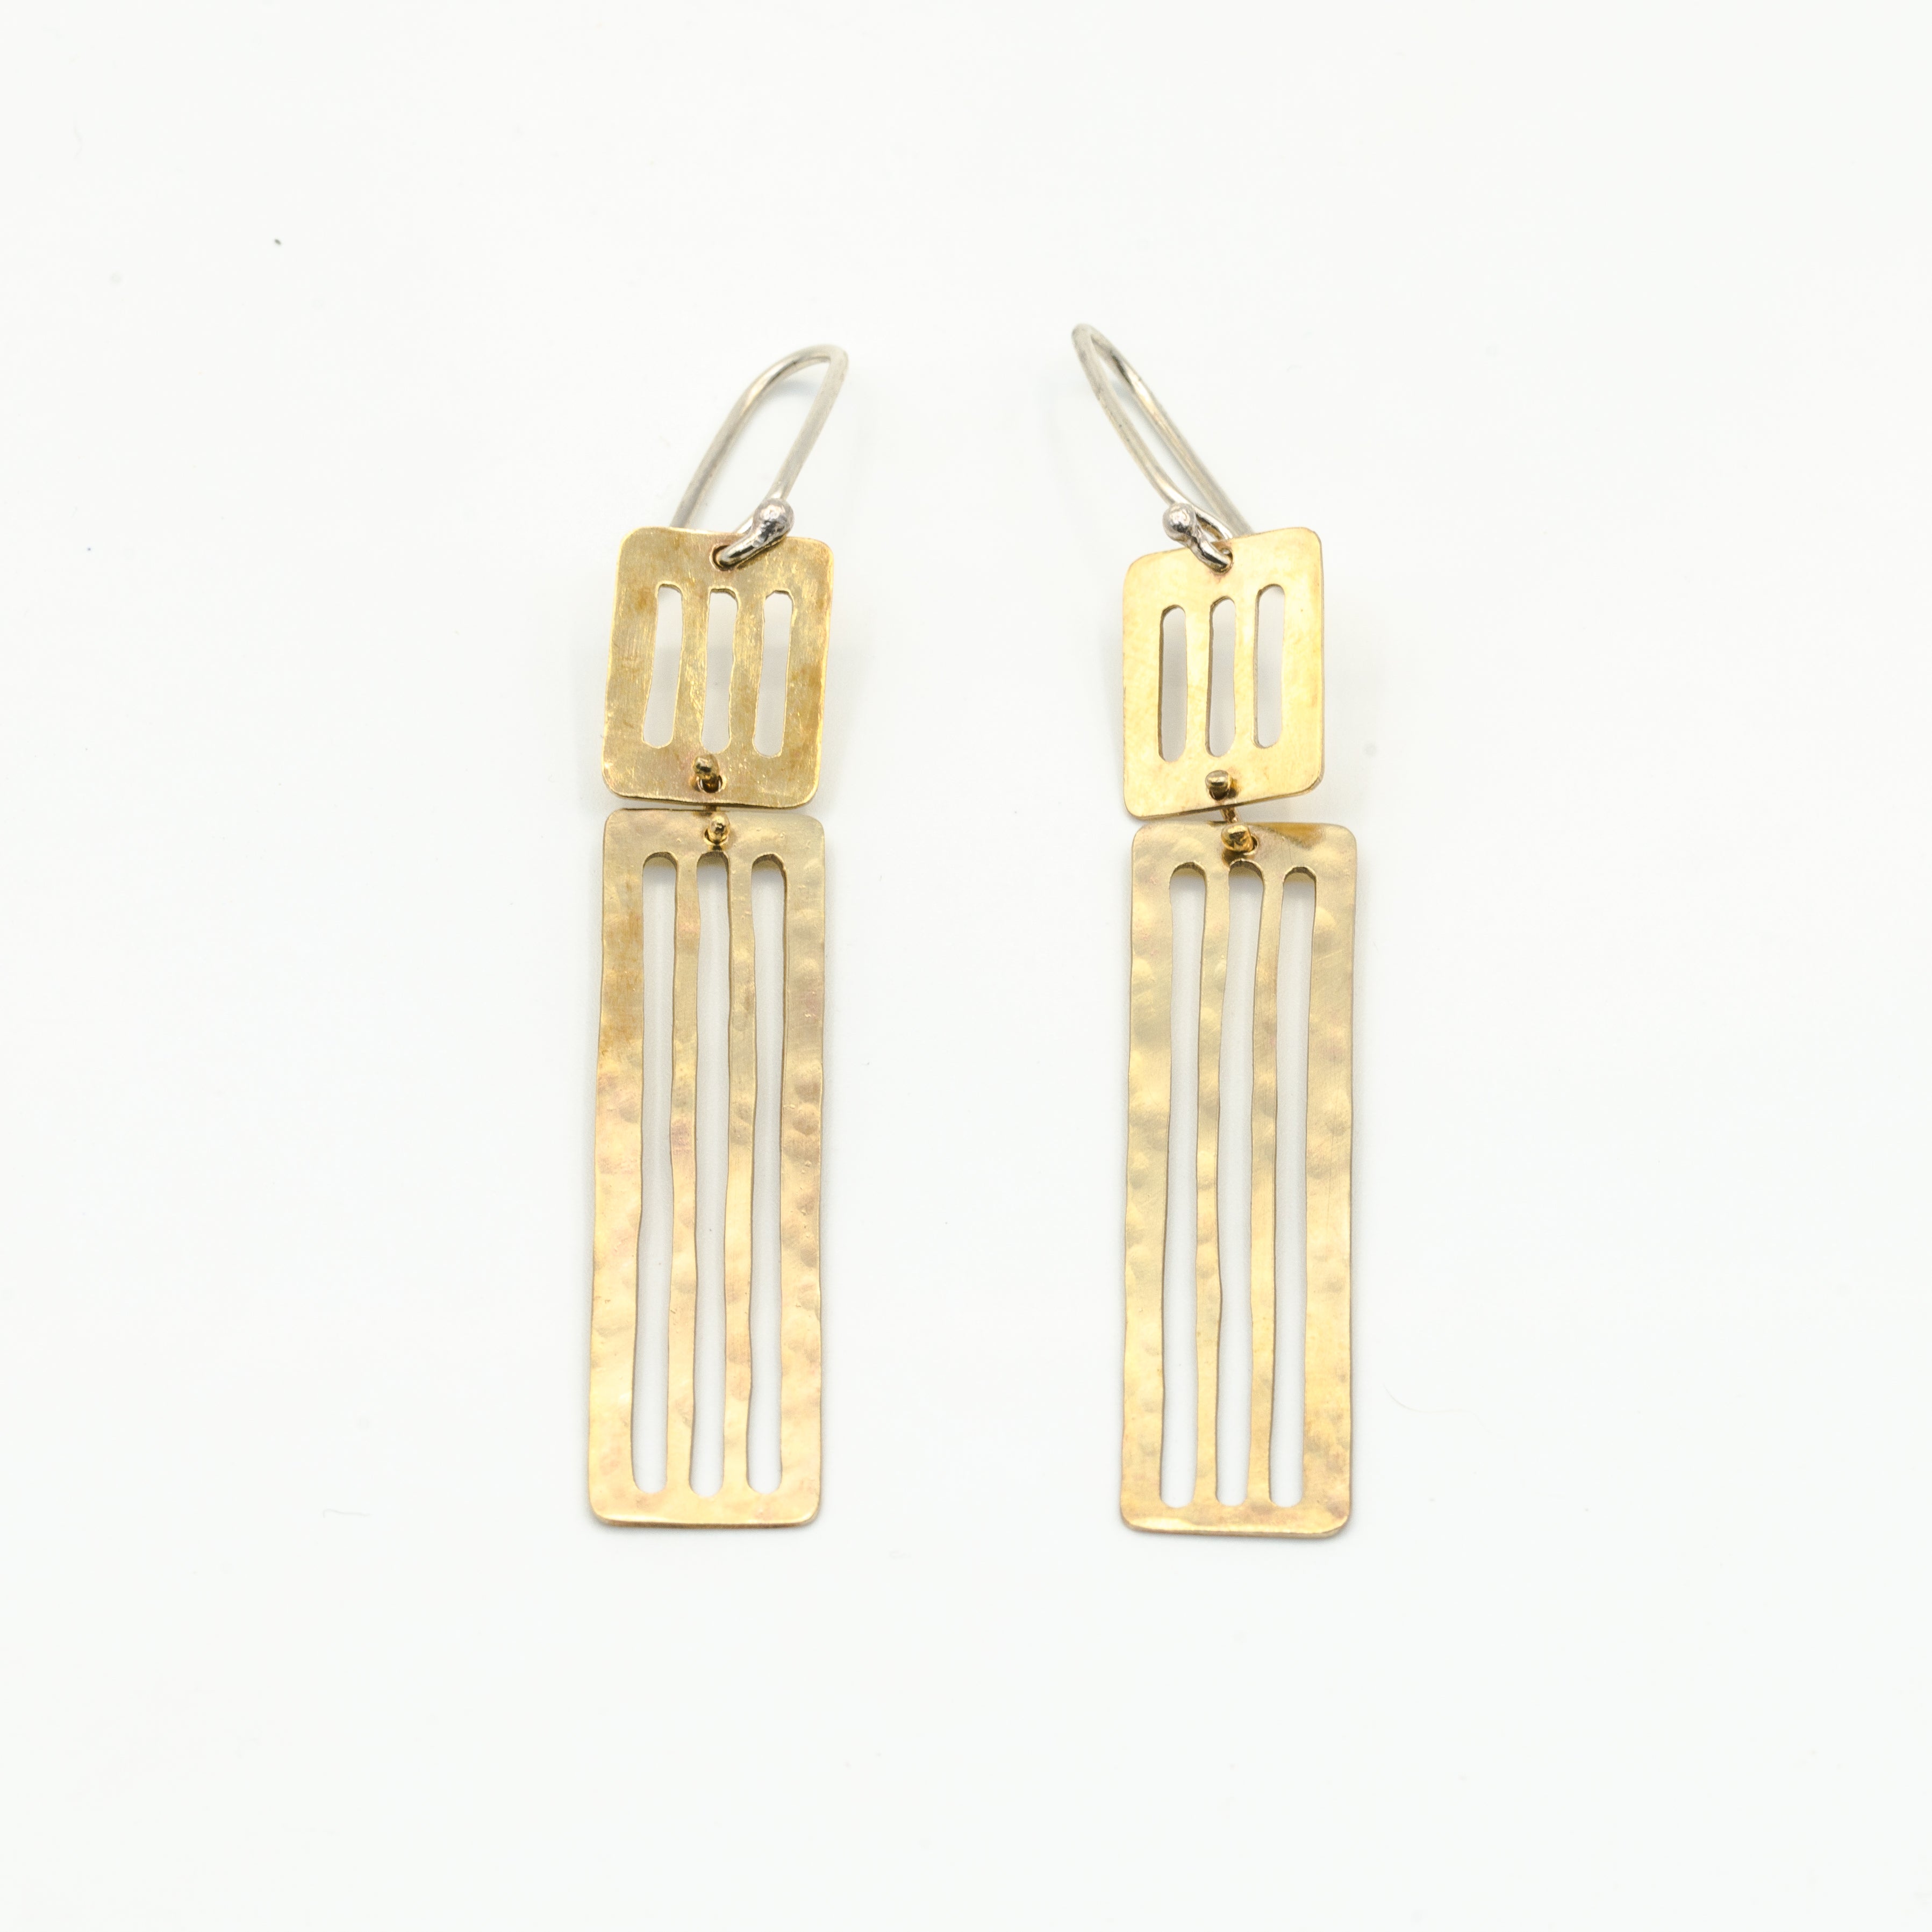 long dangly earrings laying flat on white background